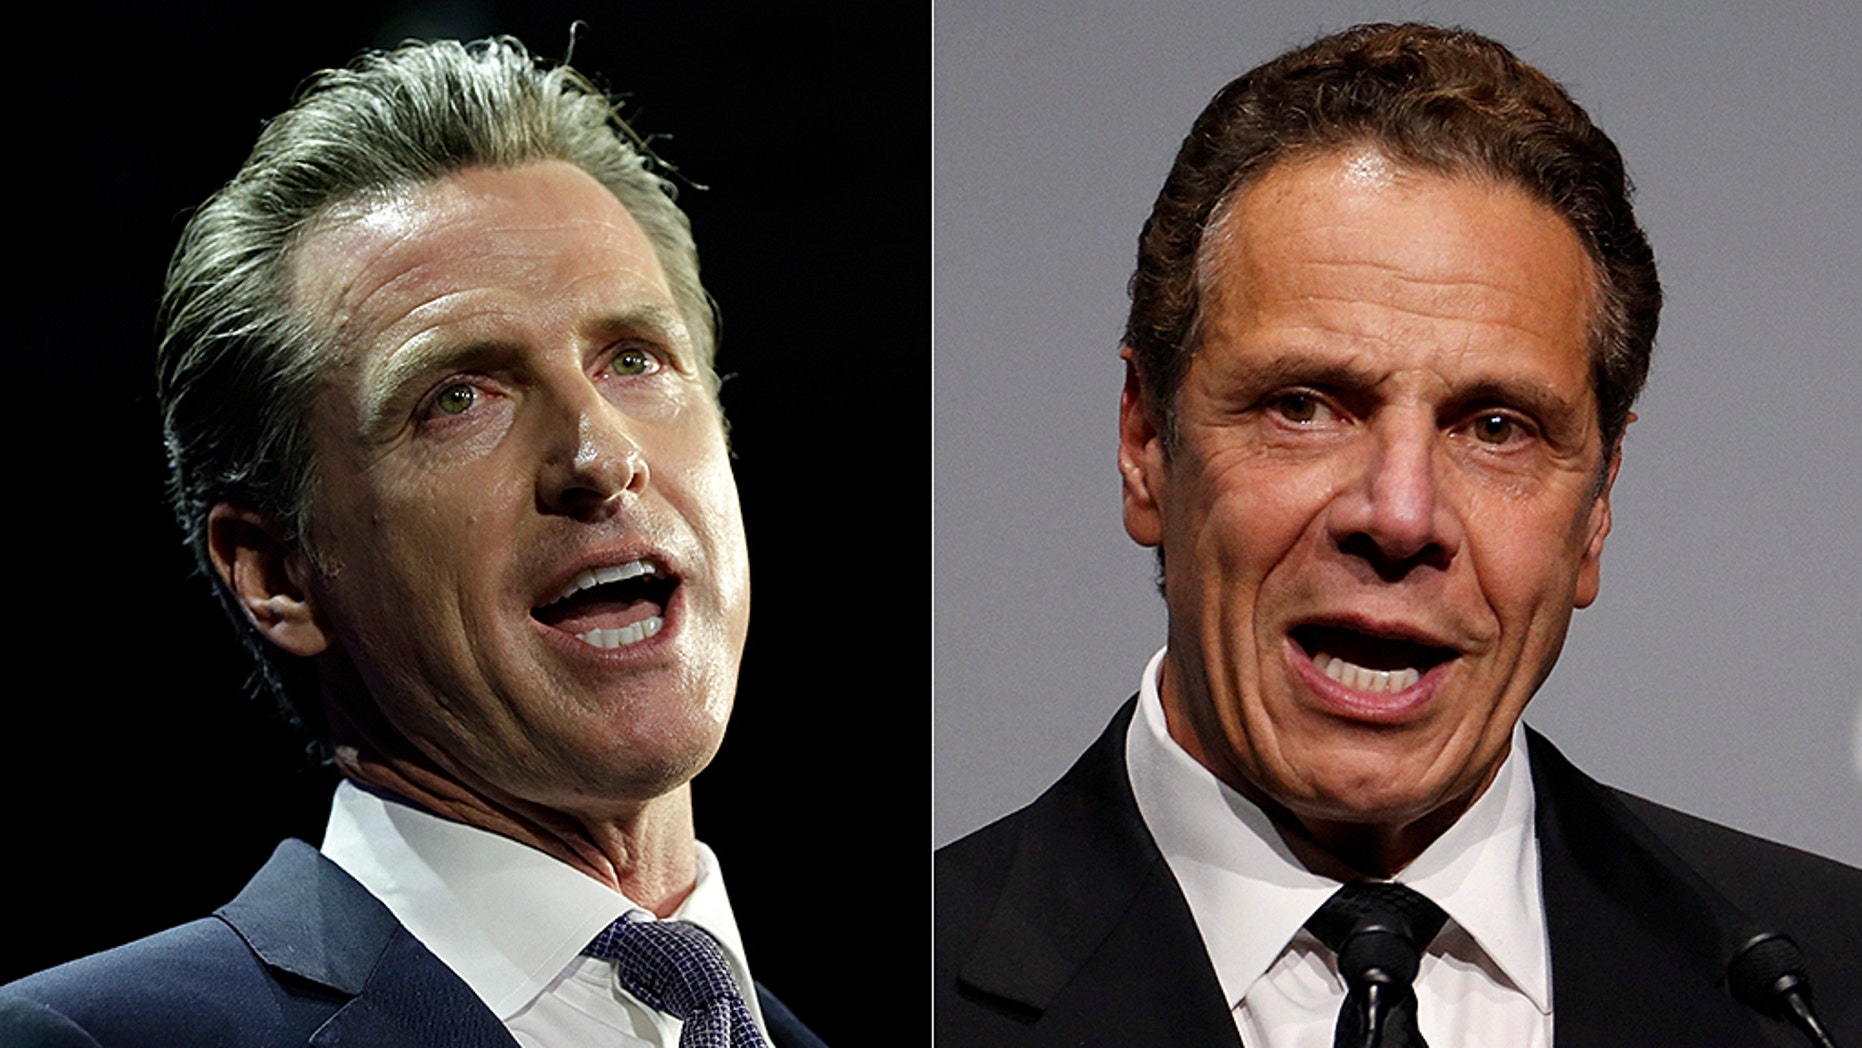 Newsom, Cuomo coasting towards socialism in California and New York - Our formula for greatness is under siege